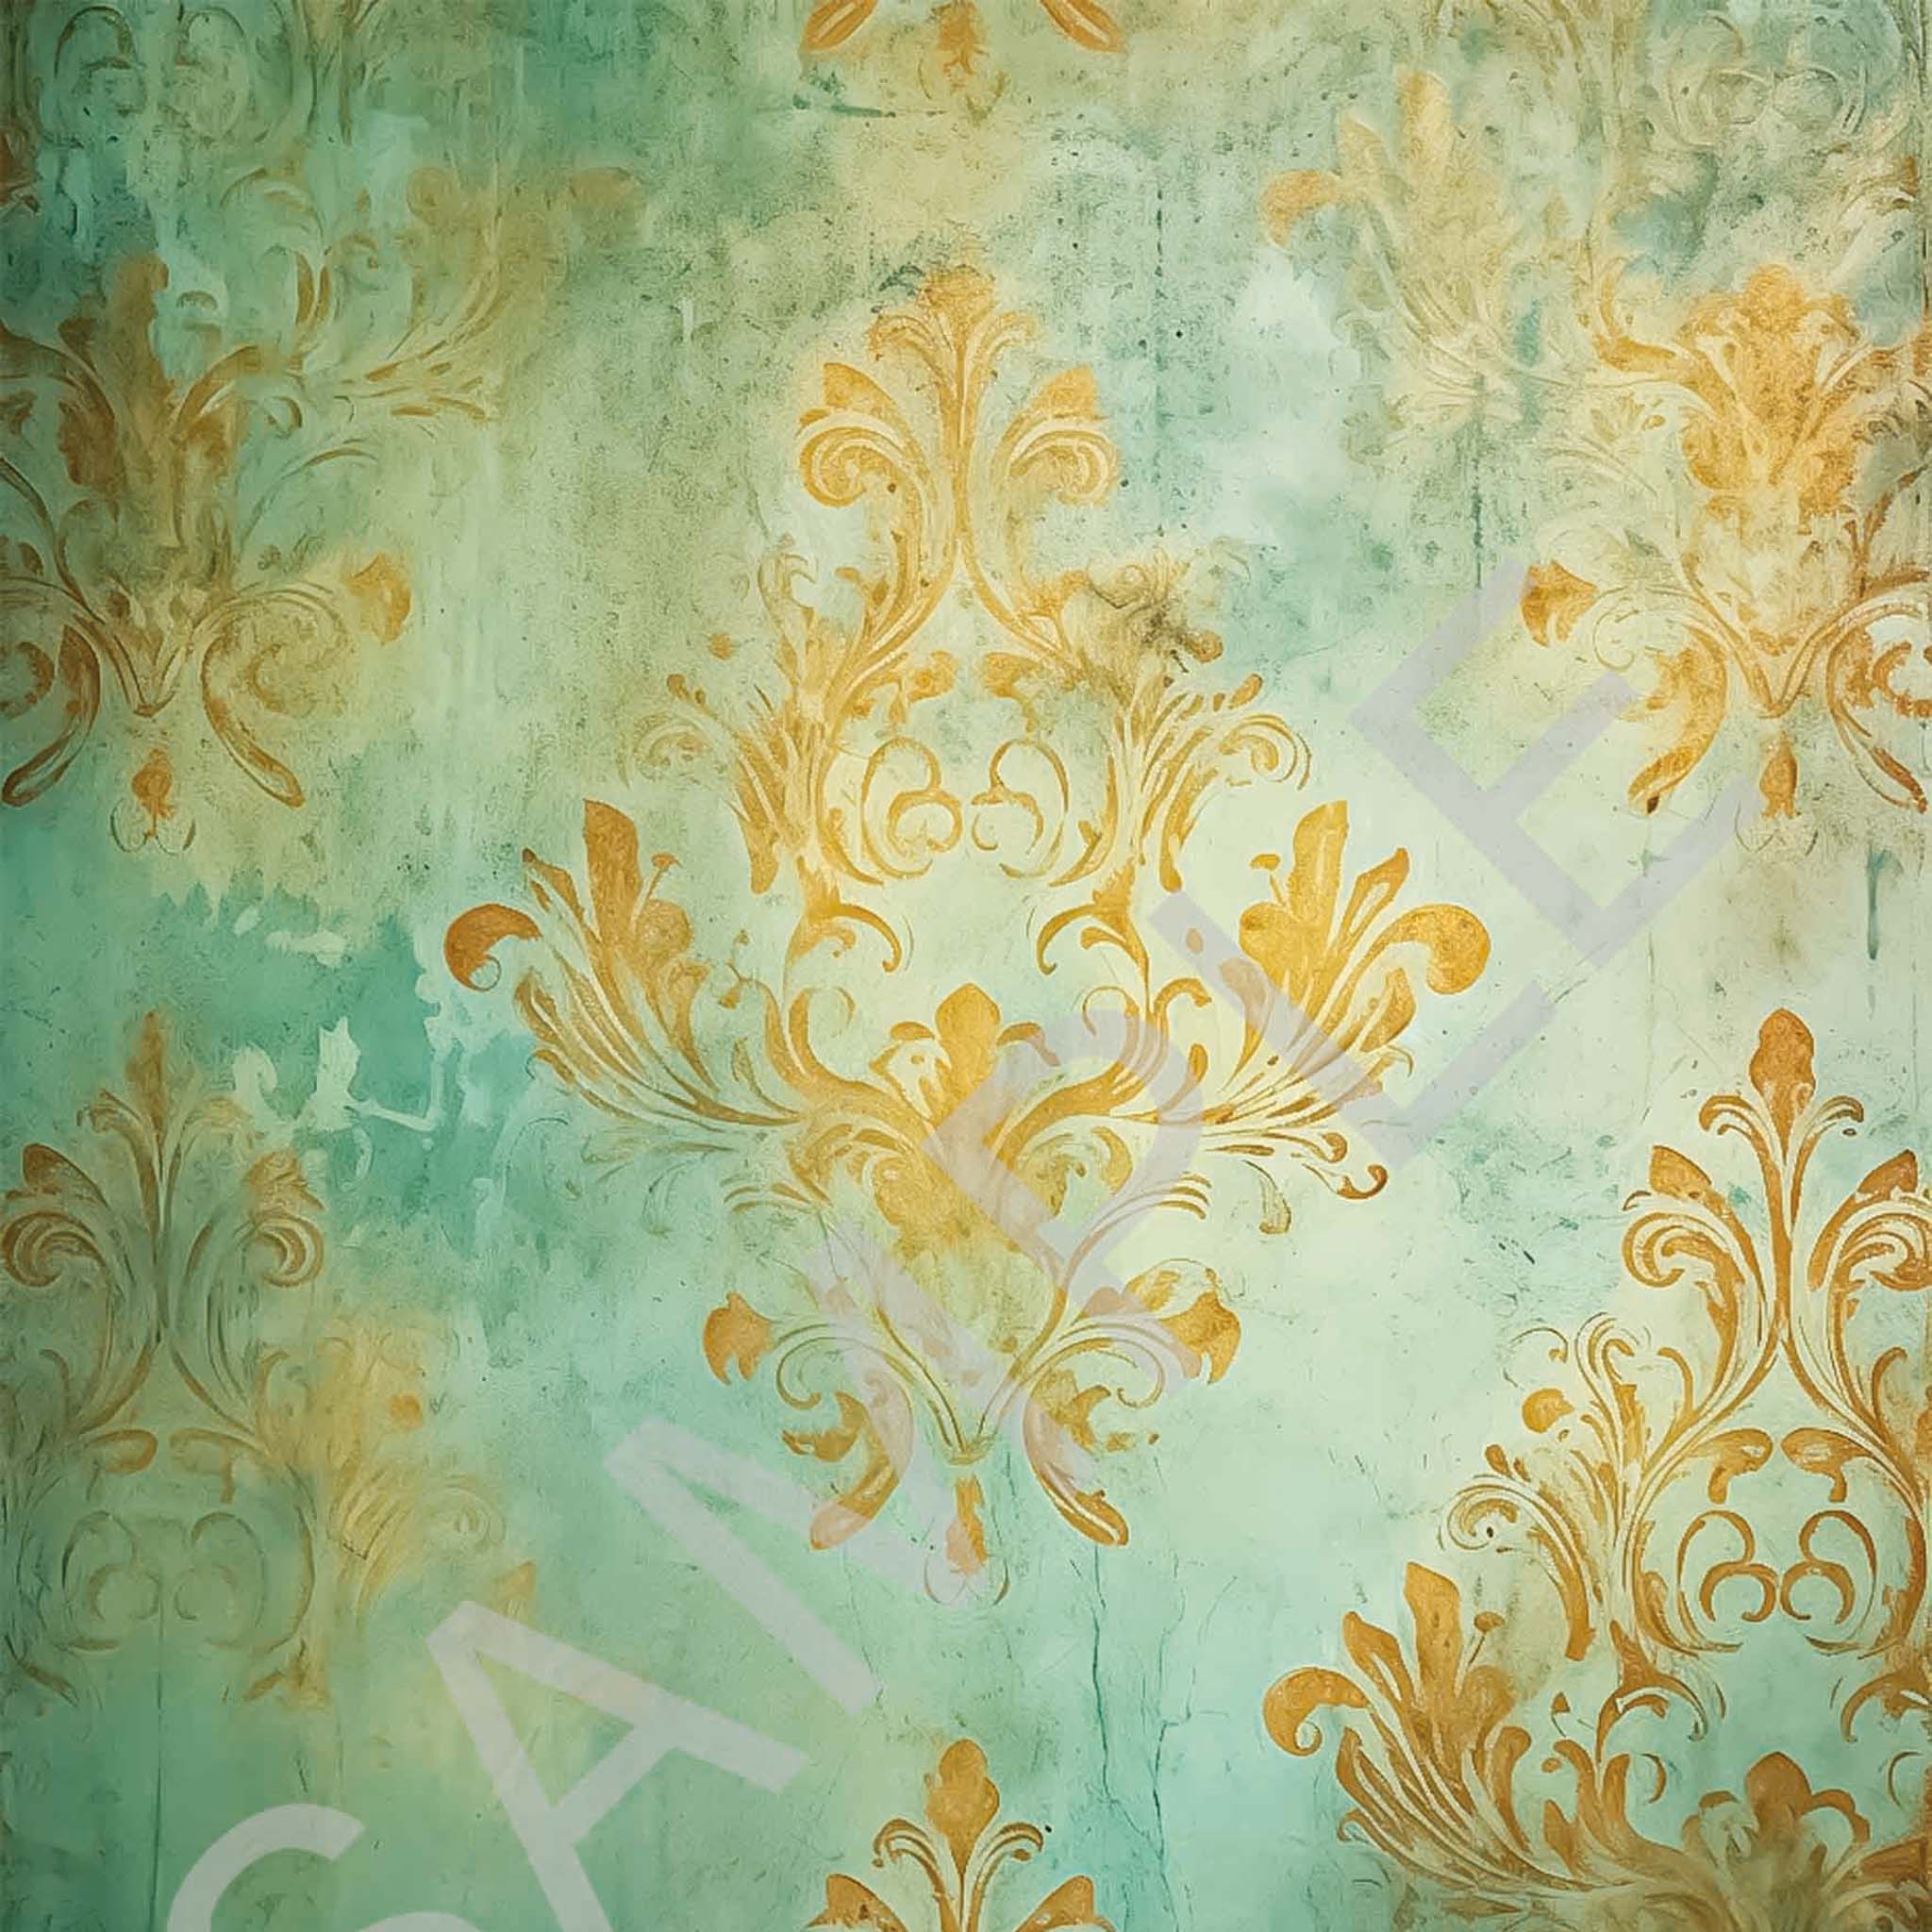 Close-up of an A4 rice paper design featuring a beautiful golden damask print on a faded blue background.